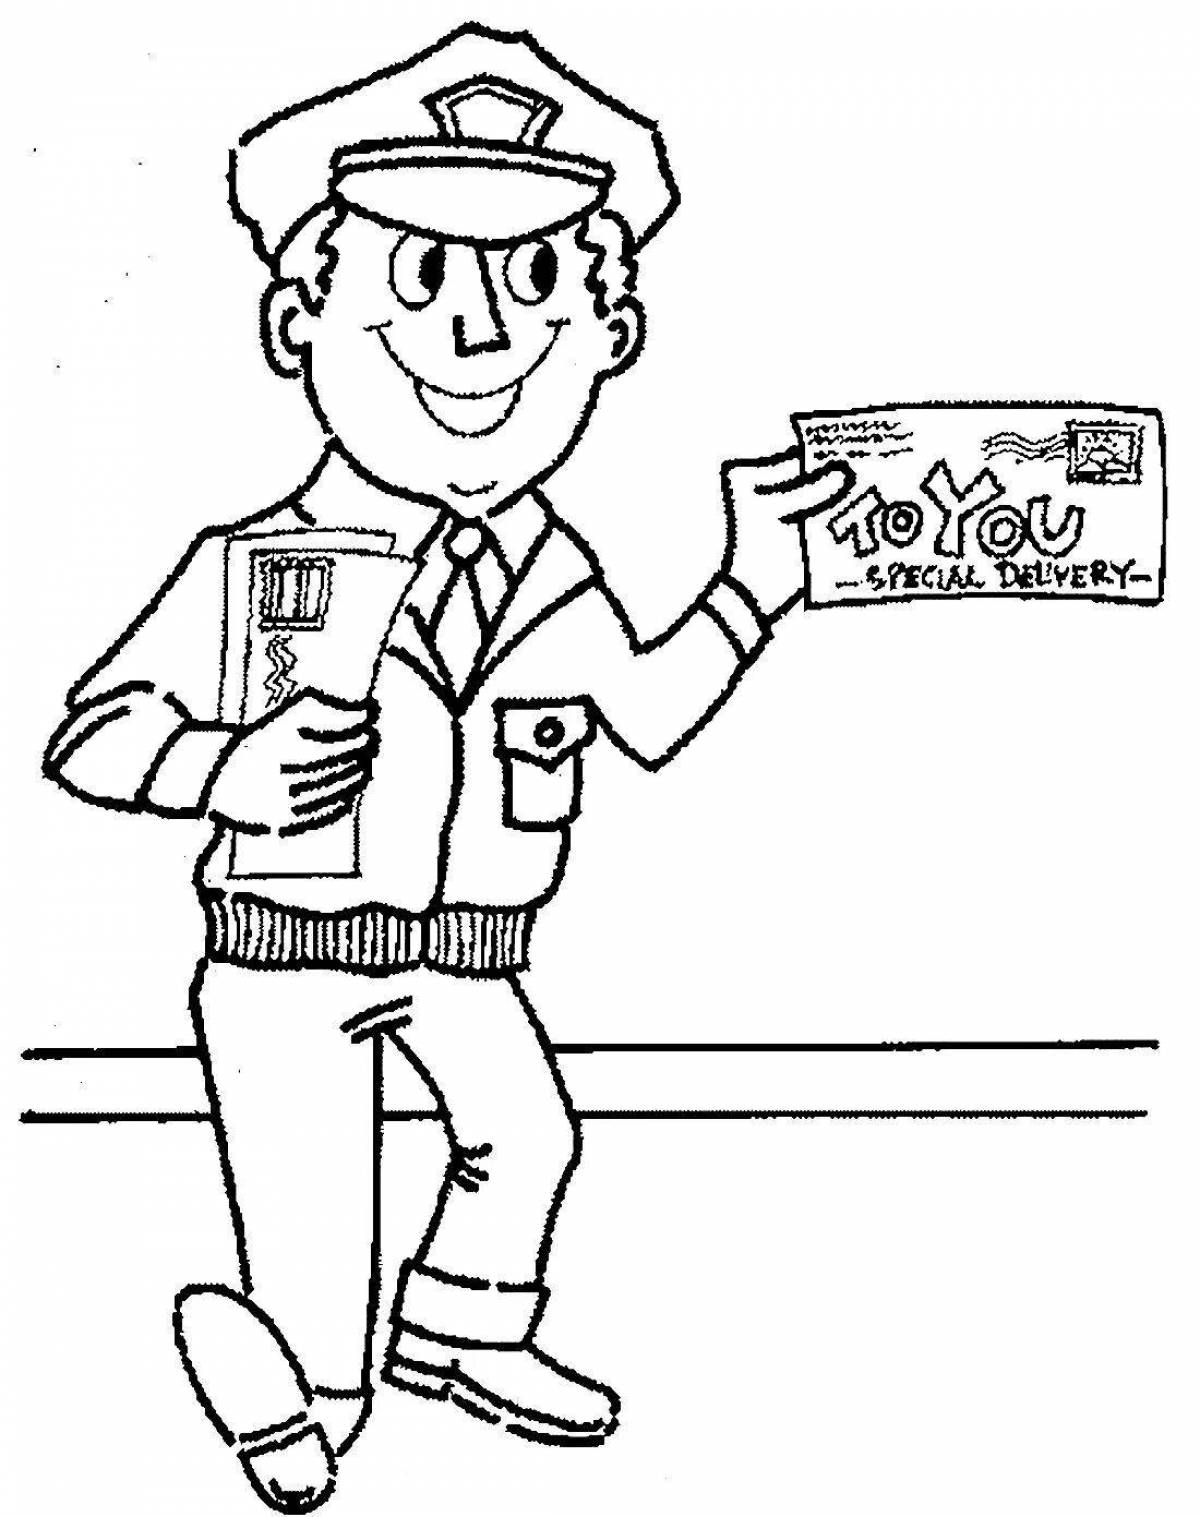 Coloring book postman with color explosion for preschoolers